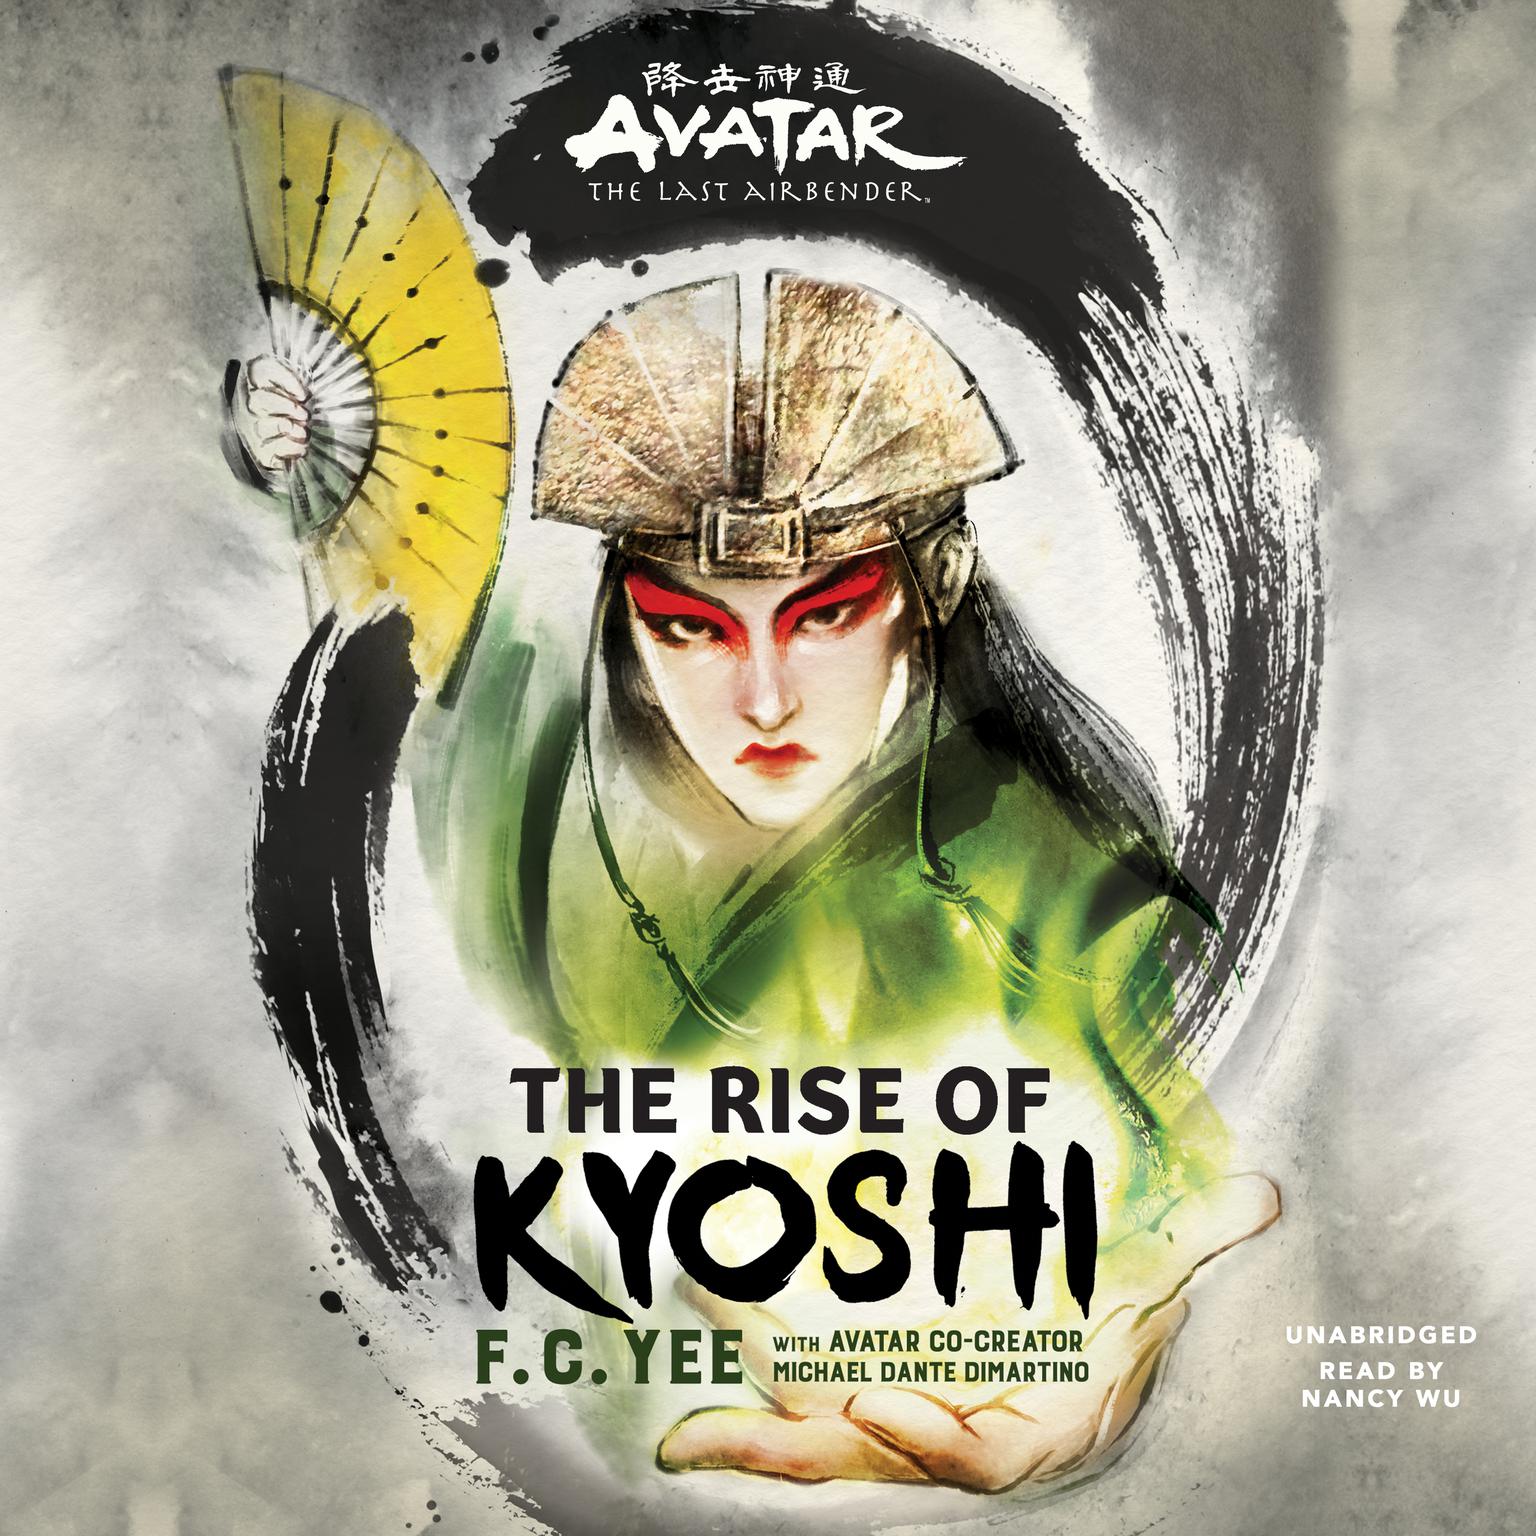 Avatar, The Last Airbender: The Rise of Kyoshi Audiobook, by F. C. Yee